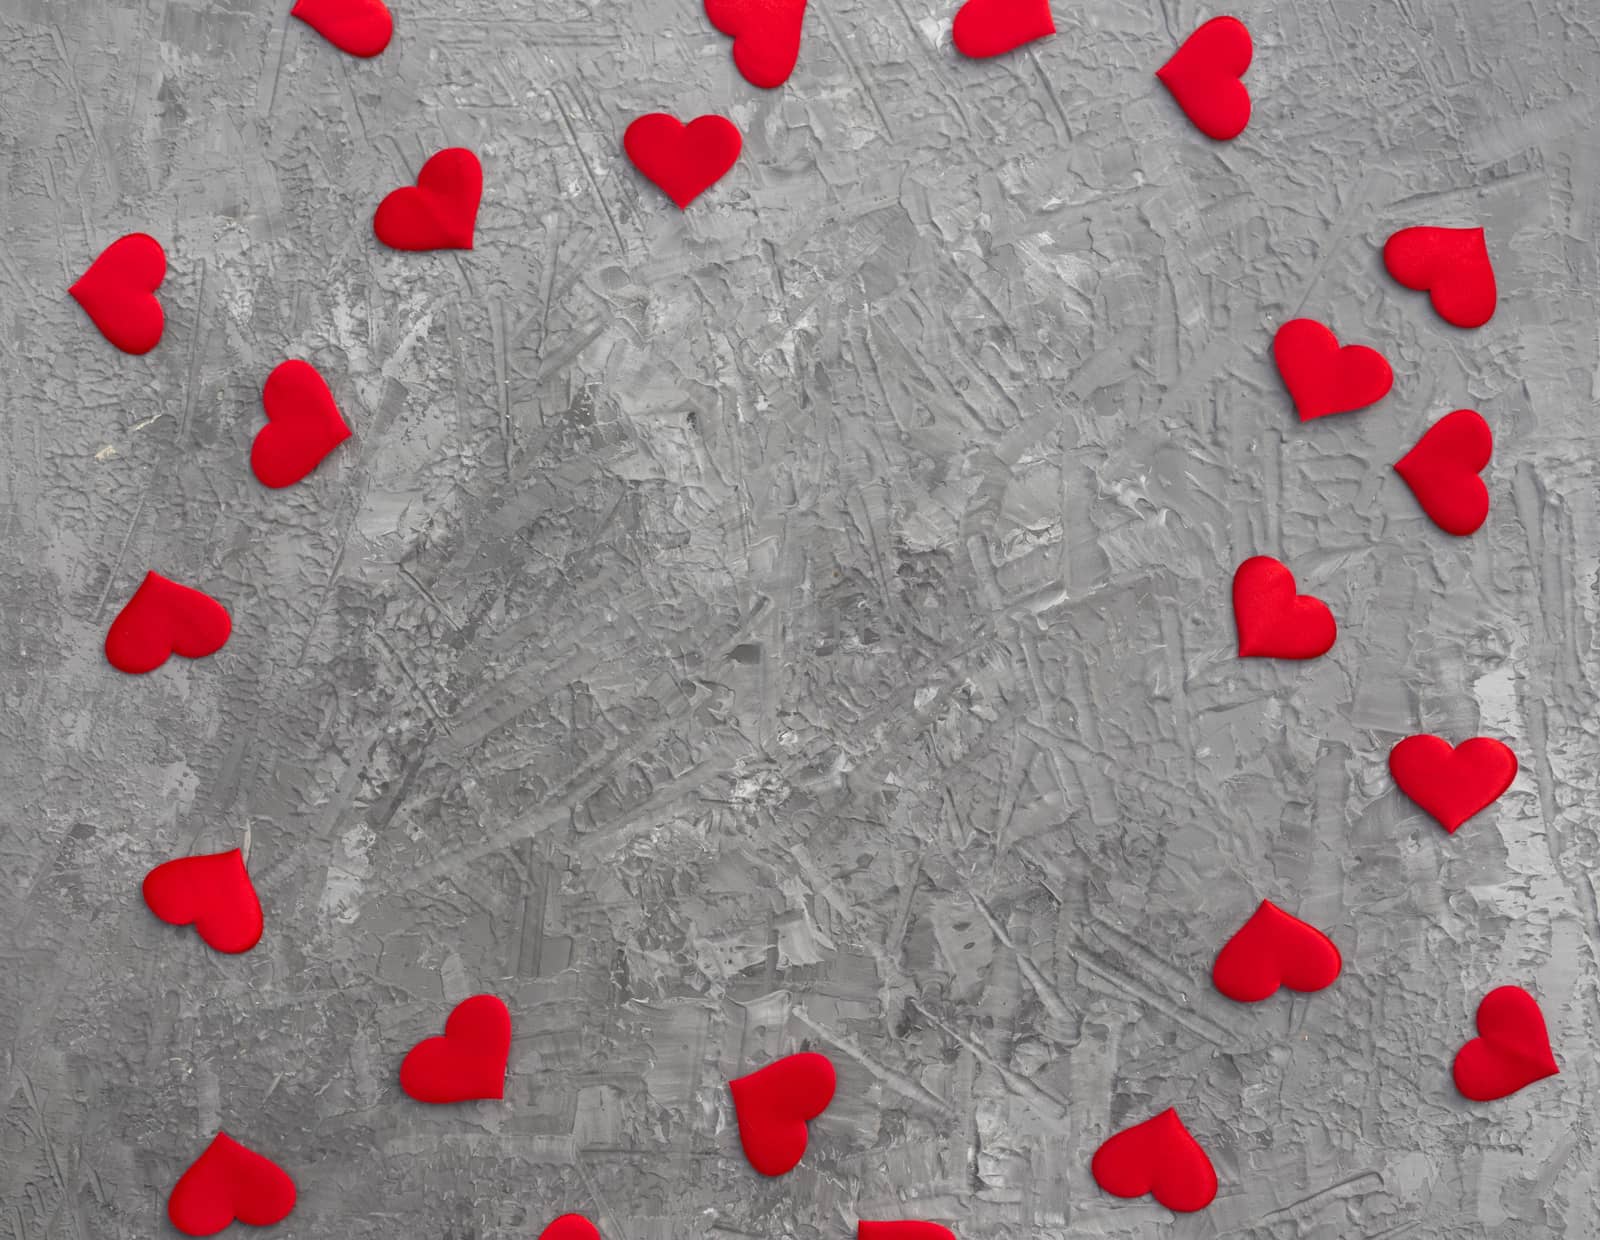 Romantic background with red hearts on concrete. by galinasharapova